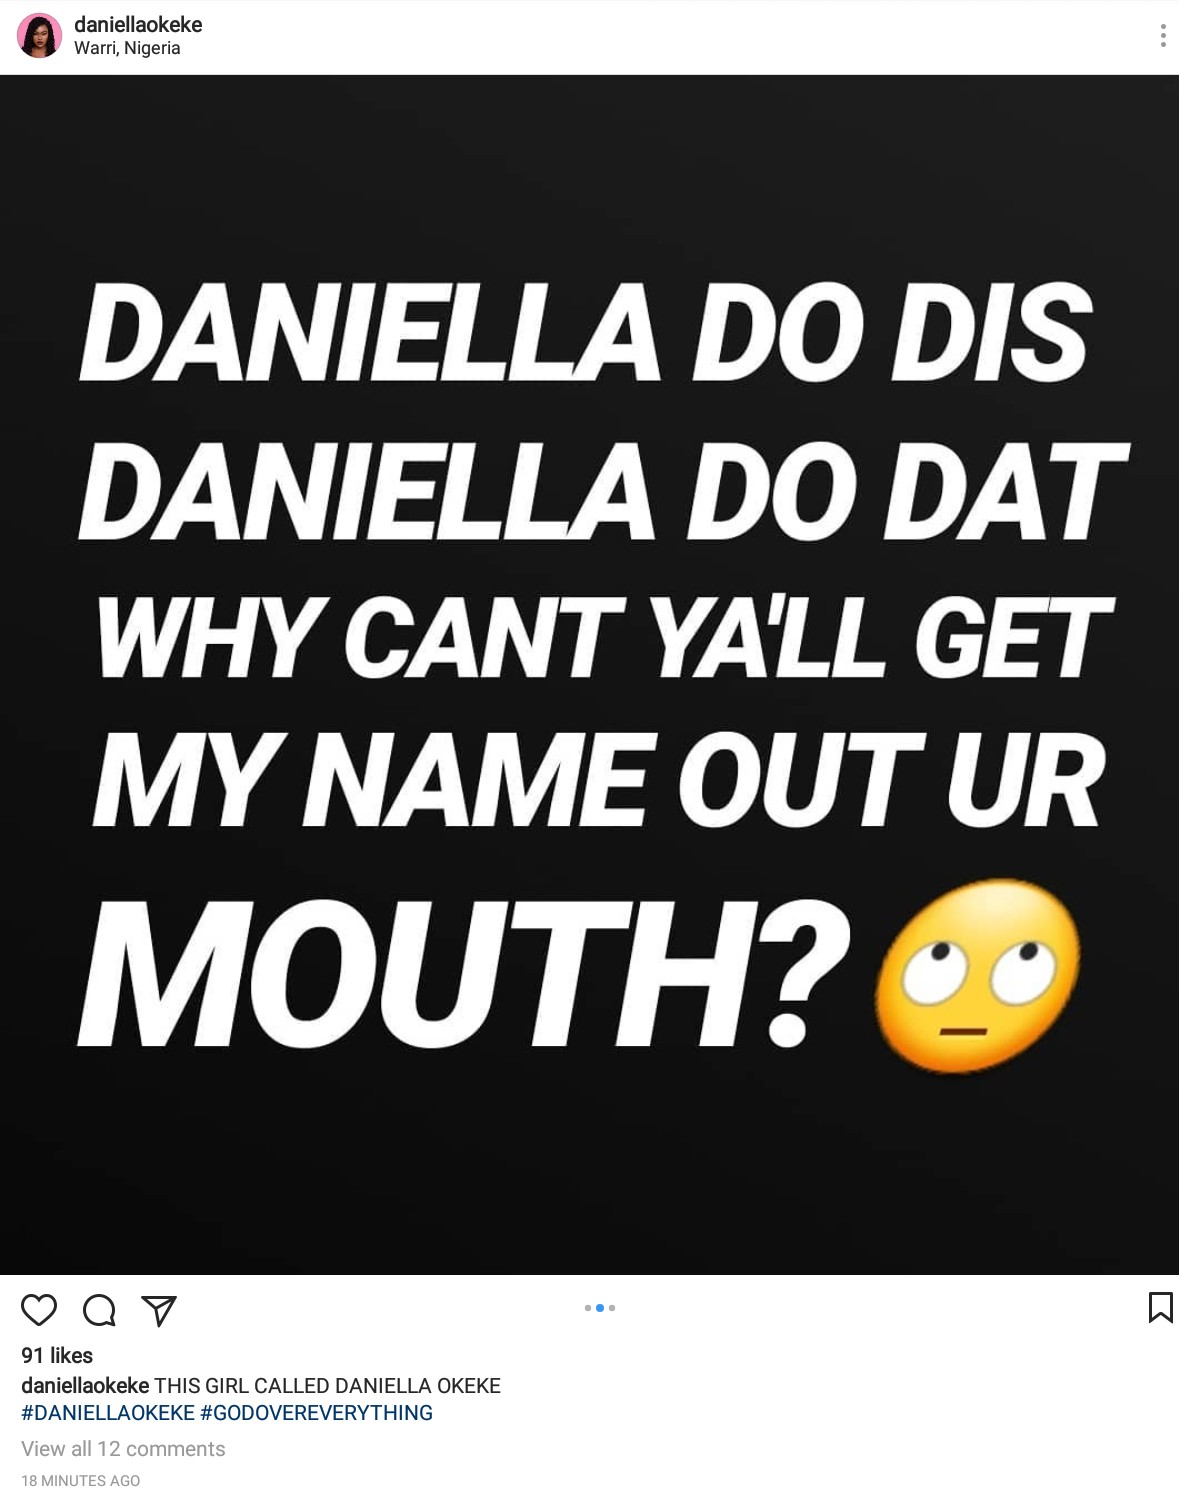 Daniella Okeke Cries Out Her Name Be Left Out Of Mouths (3)